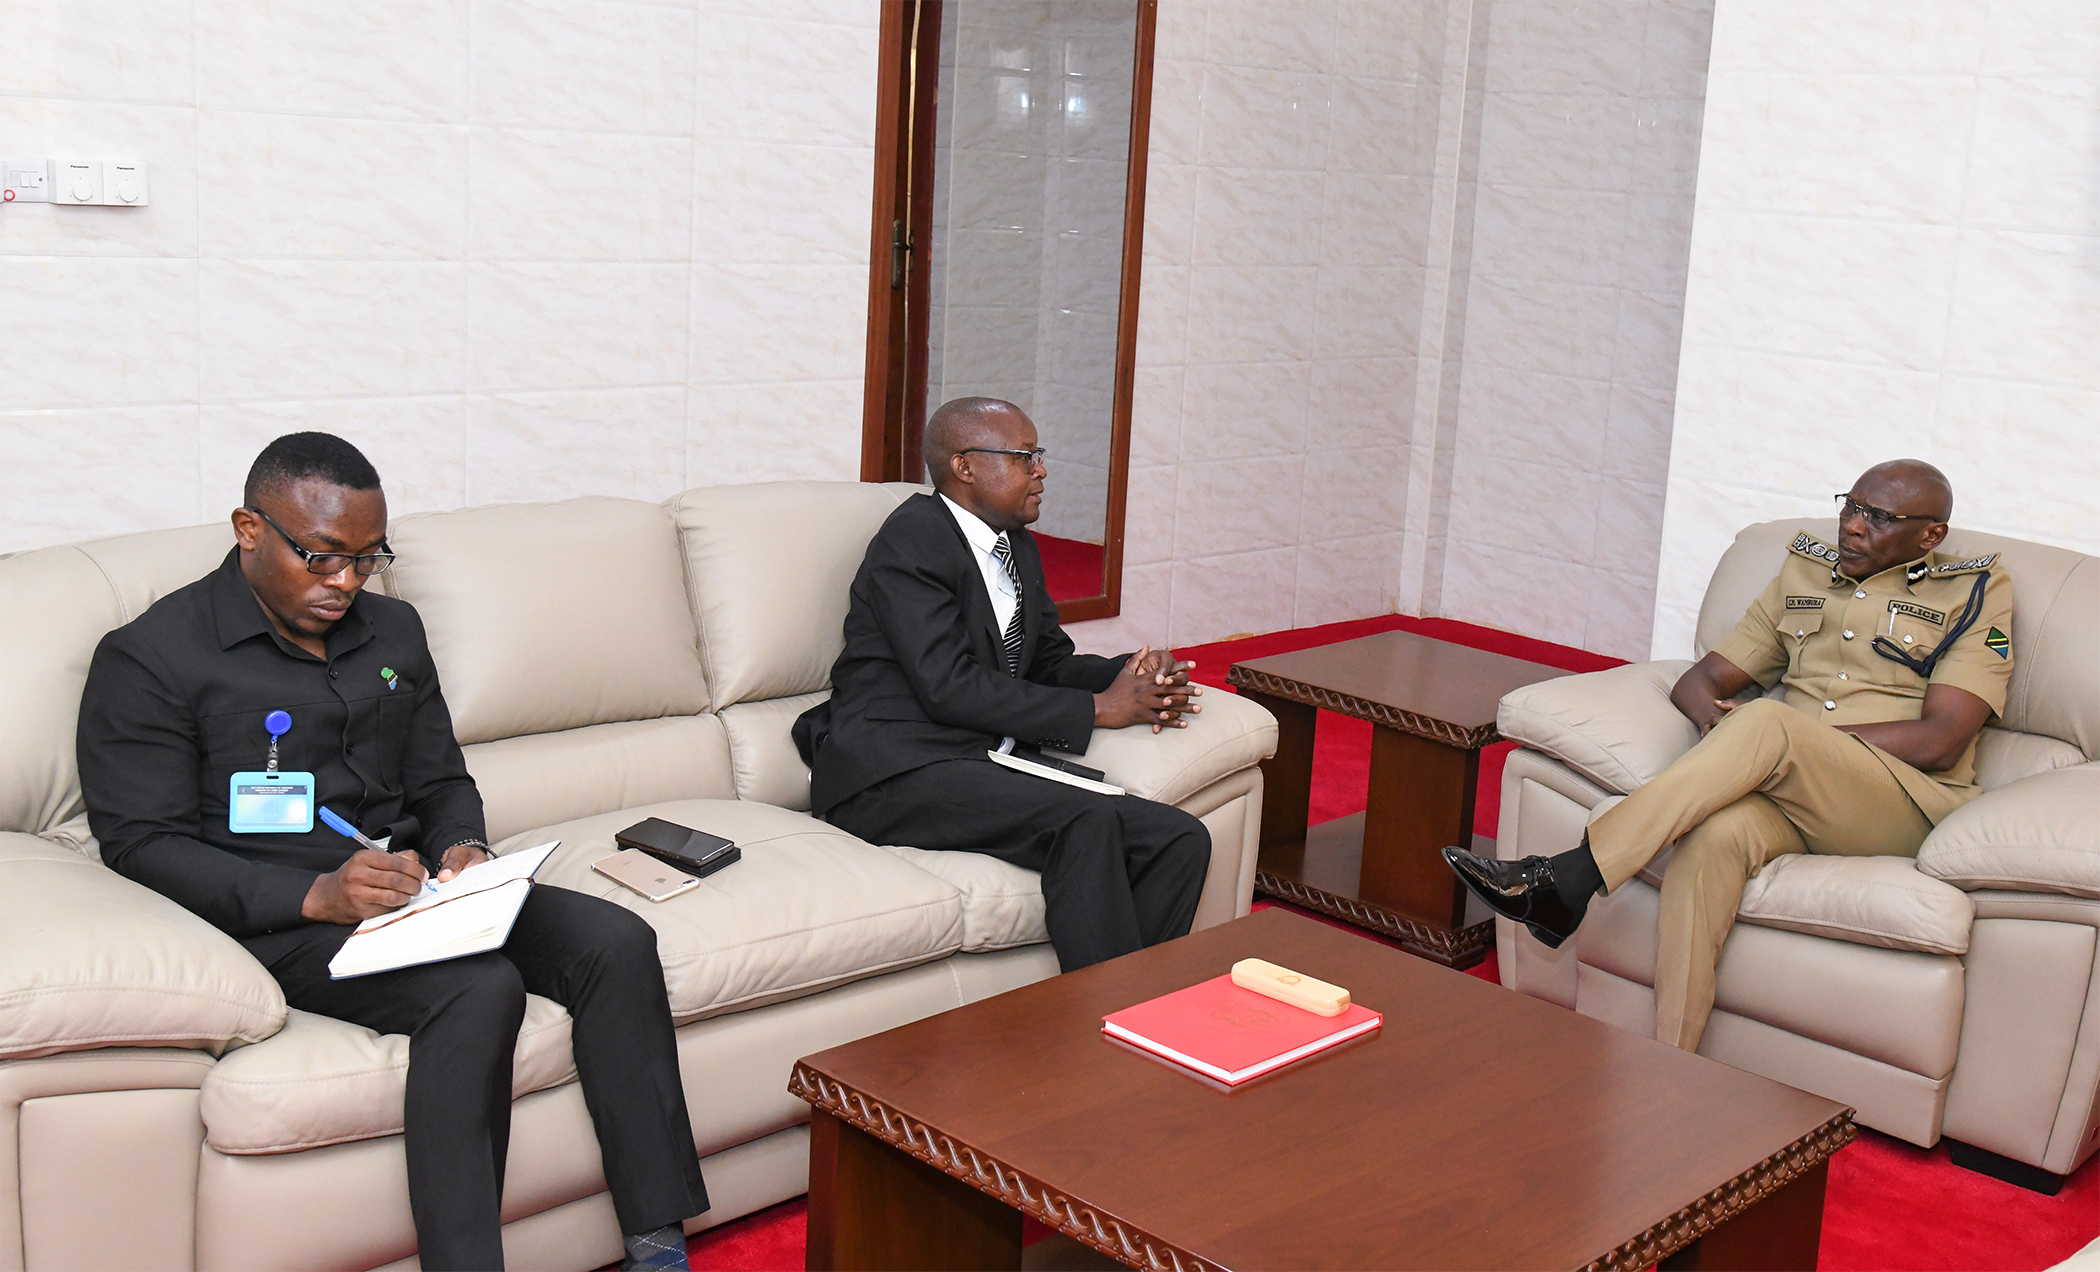 THE MEETING BETWEEN PDPC's DG WITH TANZANIA IGP